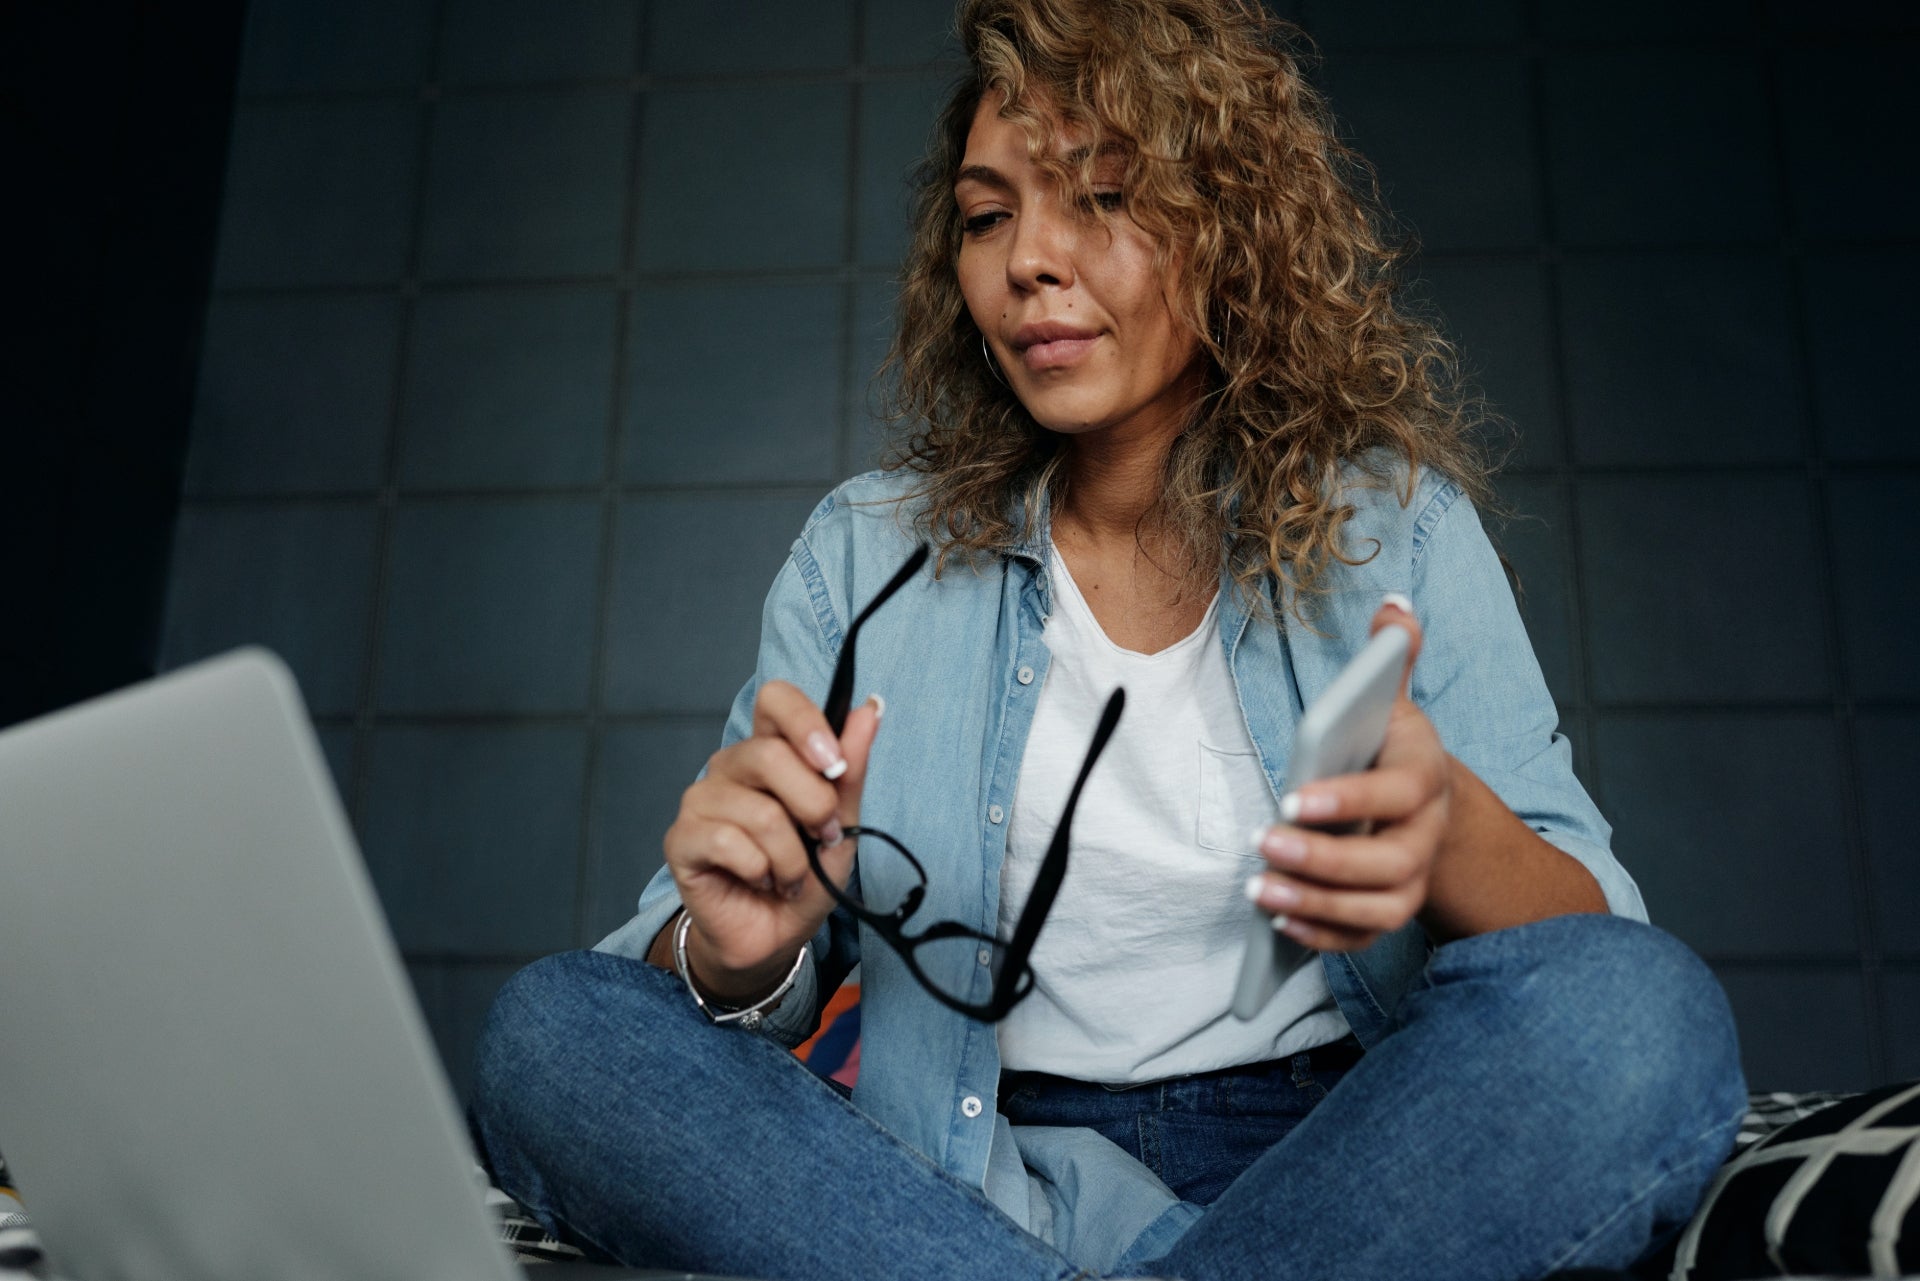 A woman sits crosslegged in front of a computer with her glasses and phone in her hands